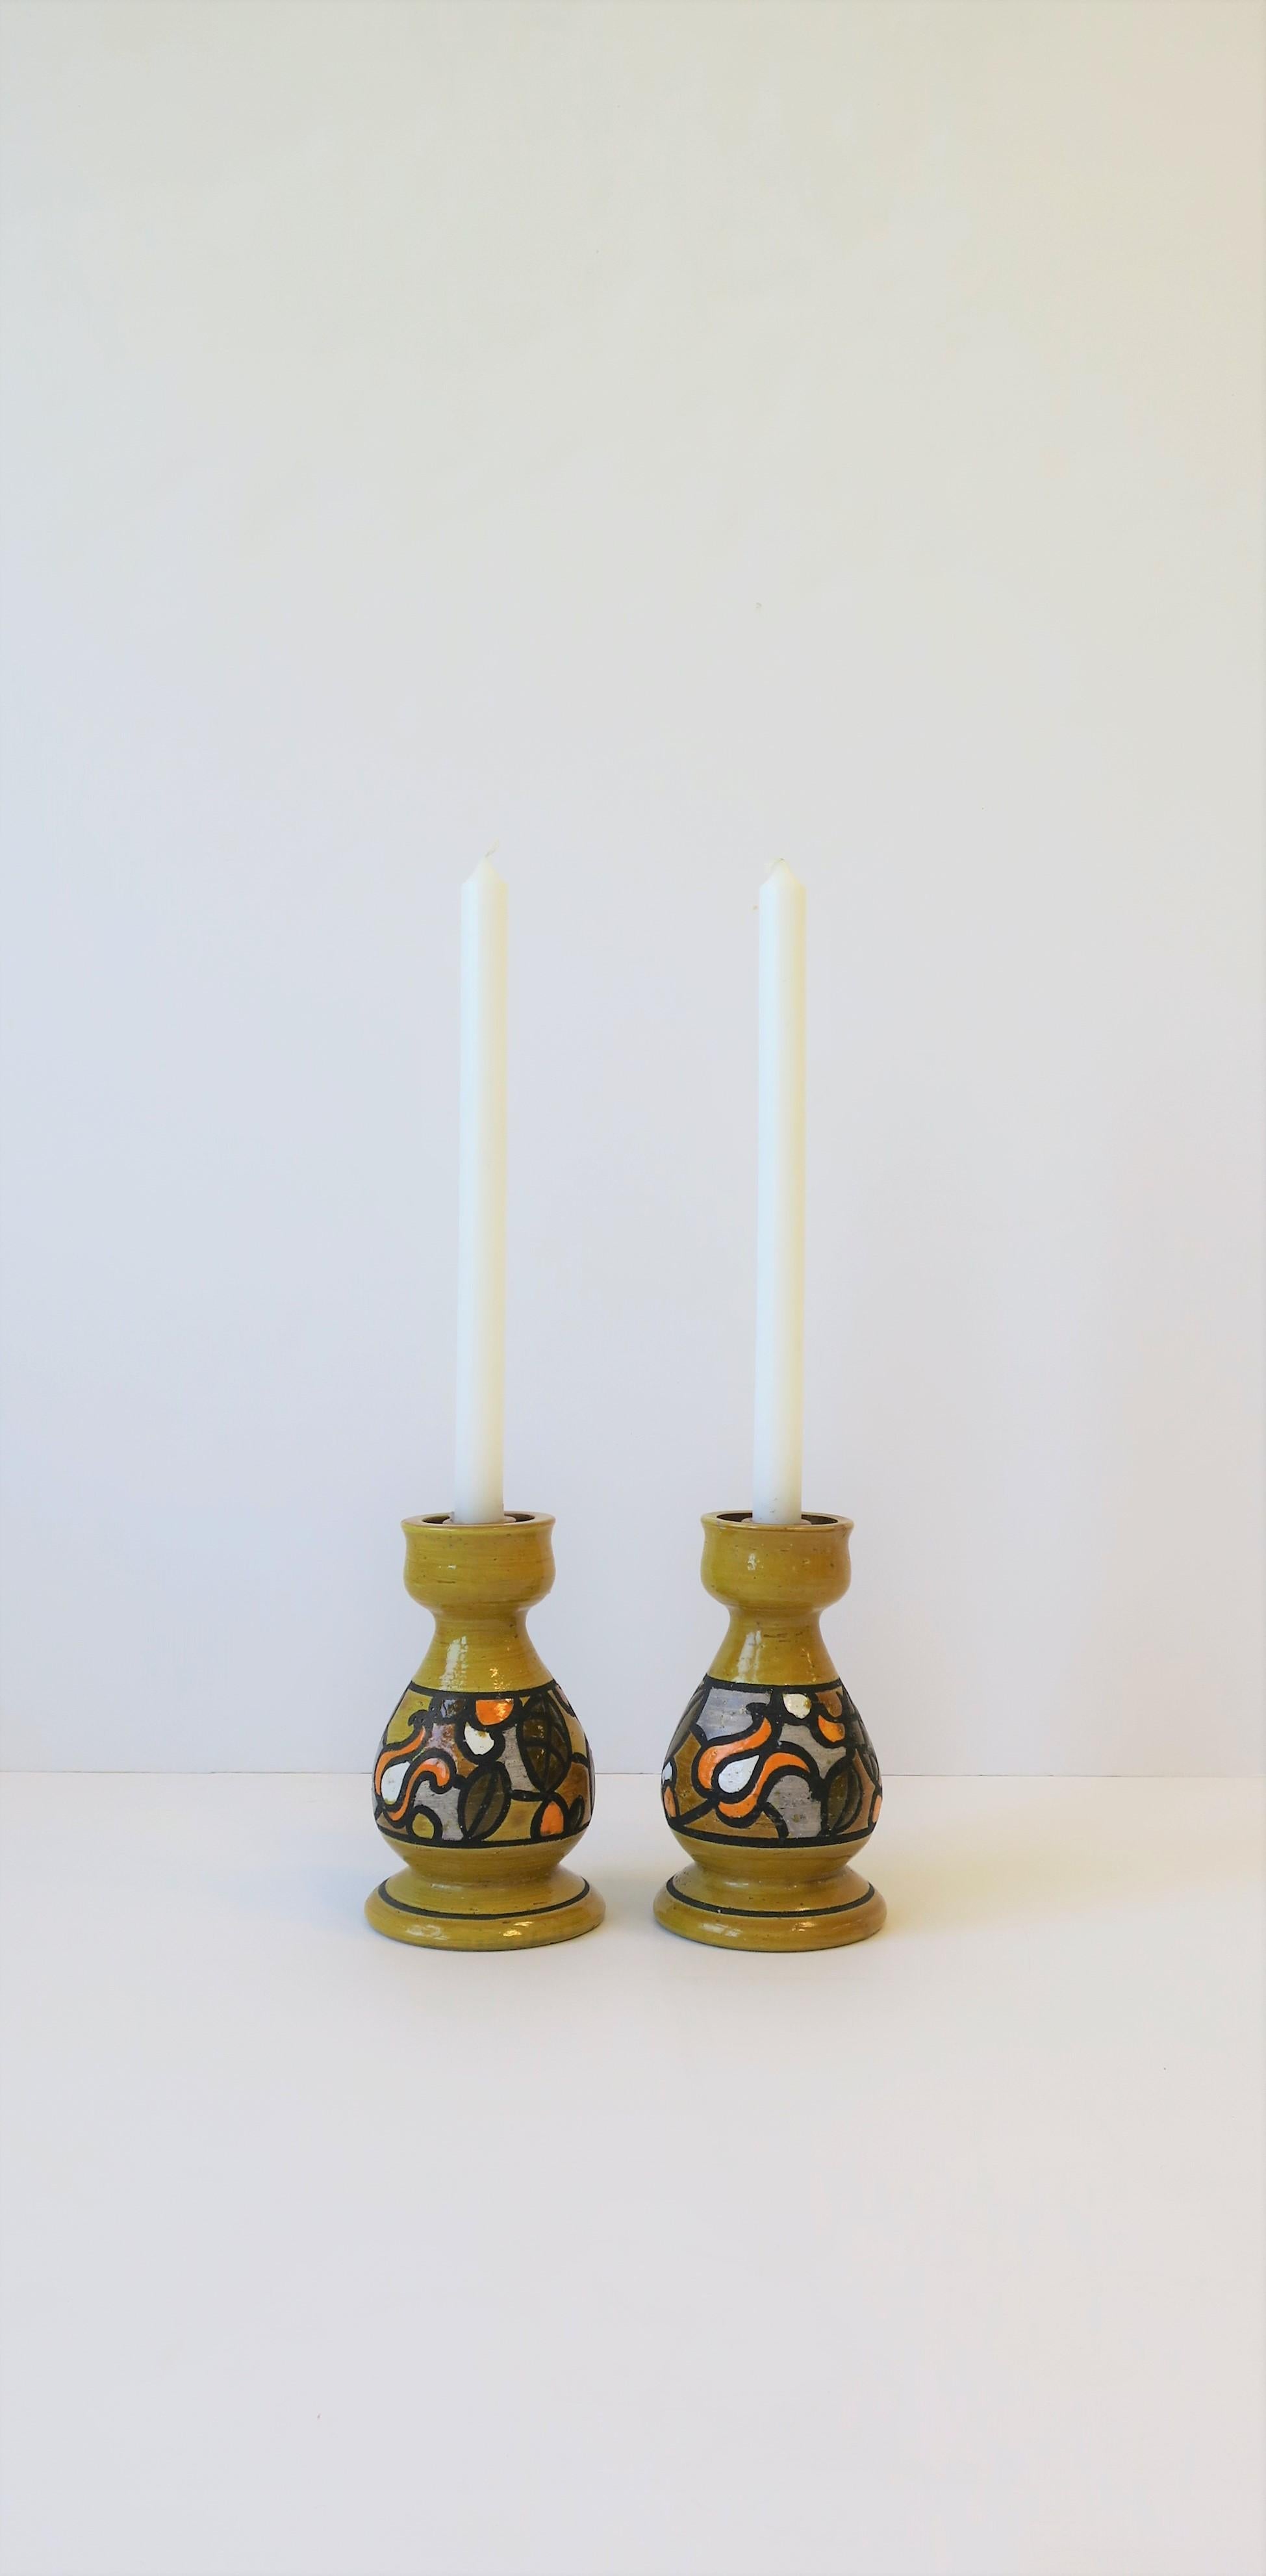 A beautiful pair of Italian pottery candlestick [candle stick] holders by Rosenthal-Netter, made in Italy, circa 1960s - early 1970s, 20th century. Colors include: golden-yellow, white, orange, grey, black/charcoal. Maker's mark on bottom as show in